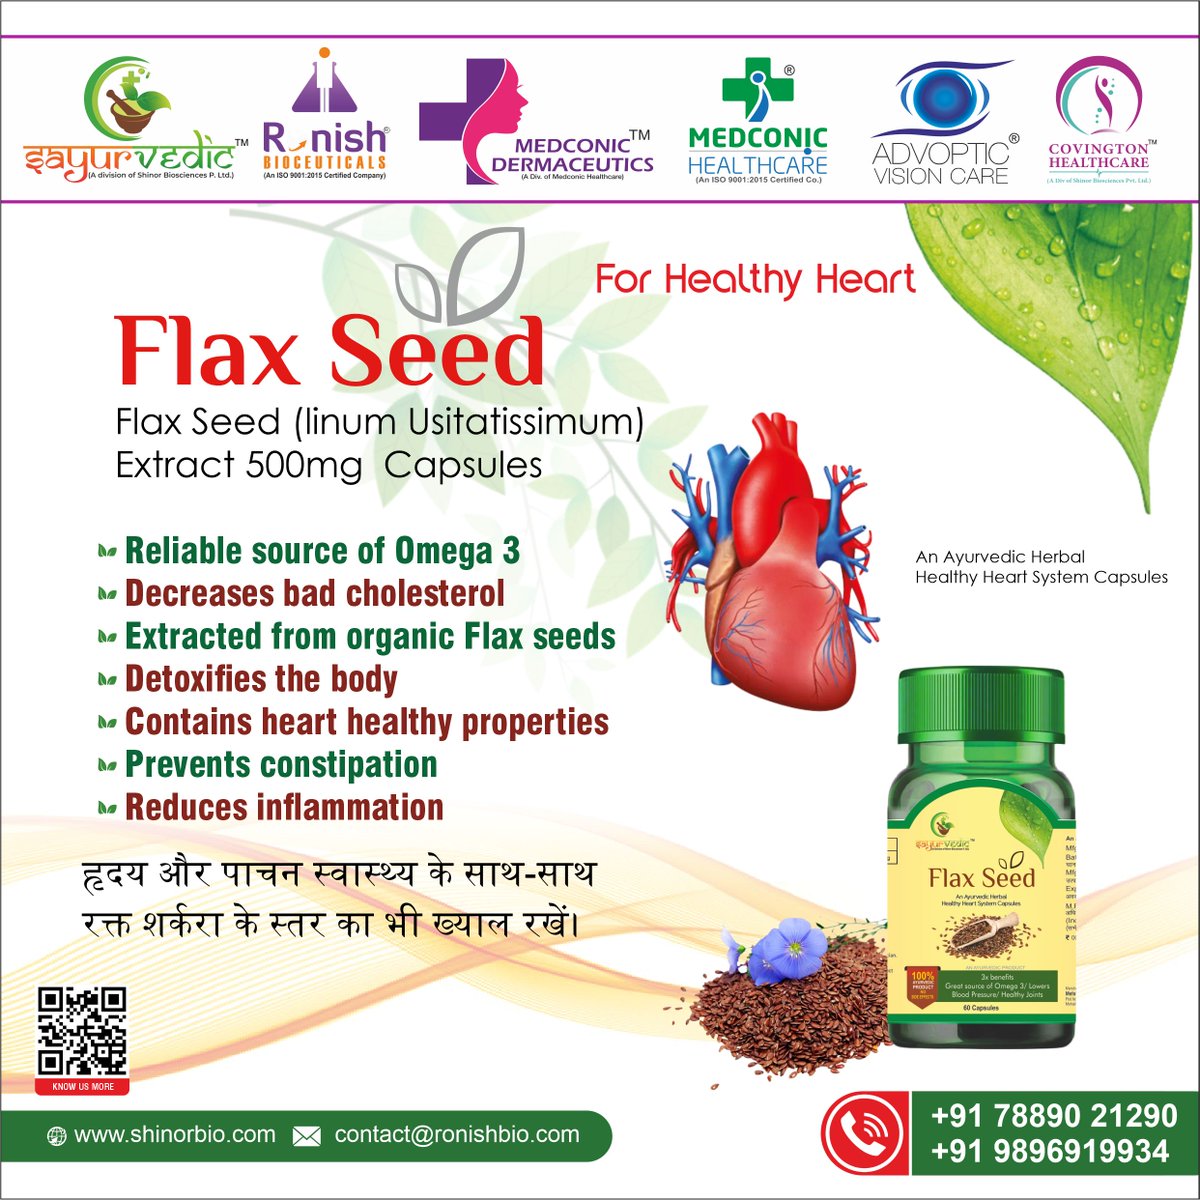 🌿 Discover the power of FLAXSEED (Linum Usitatissimum) Extract 500mg by Sayurvedic! 🌿

💊 Packed with essential nutrients and antioxidants, our FLAXSEED supplement promotes overall wellness and vitality.

#Sayurvedic #FLAXSEED #HealthIsWealth  #PCDPharma #FranchiseOpportunity